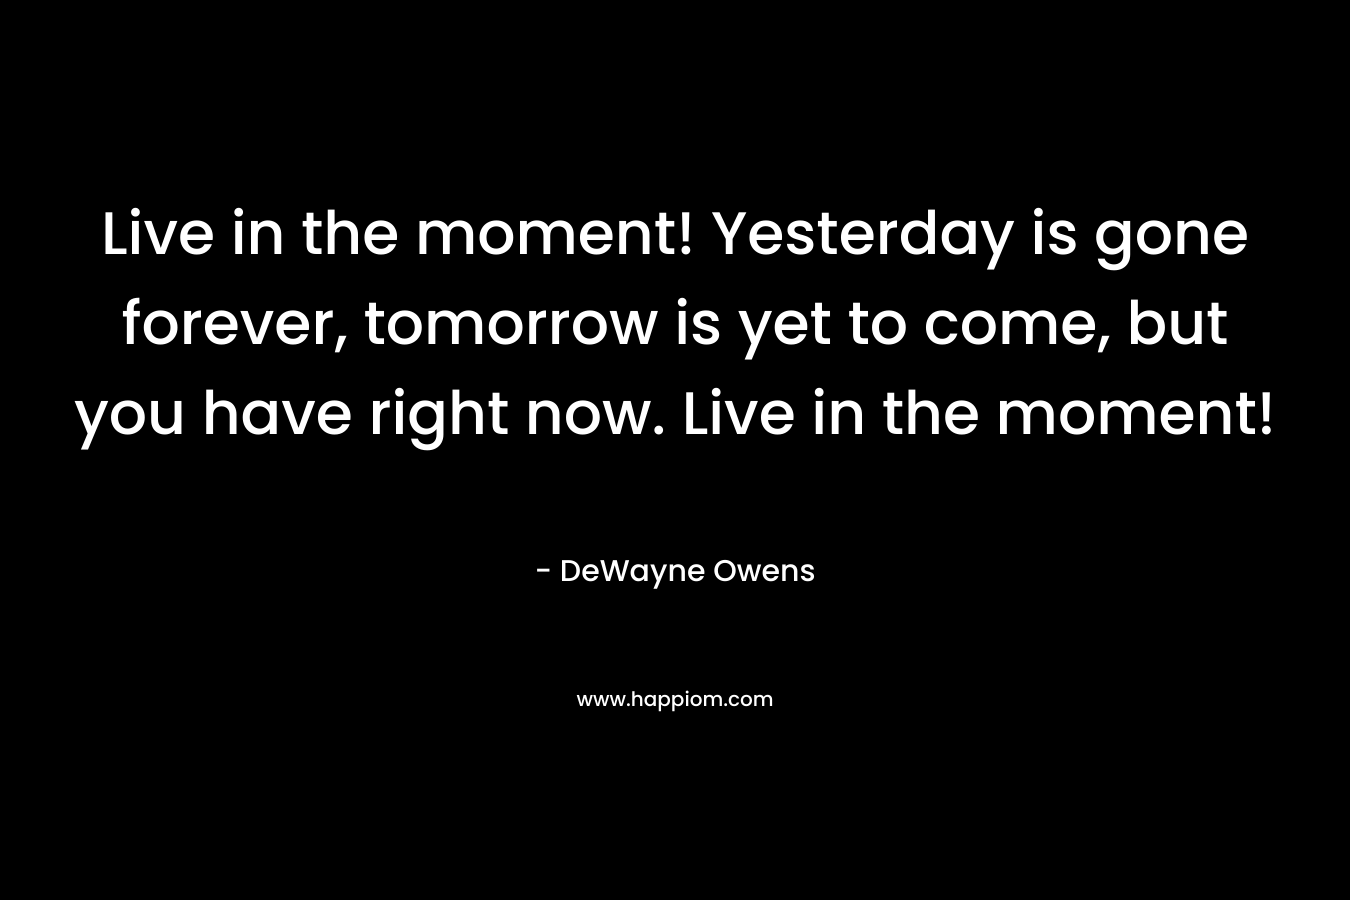 Live in the moment! Yesterday is gone forever, tomorrow is yet to come, but you have right now. Live in the moment!